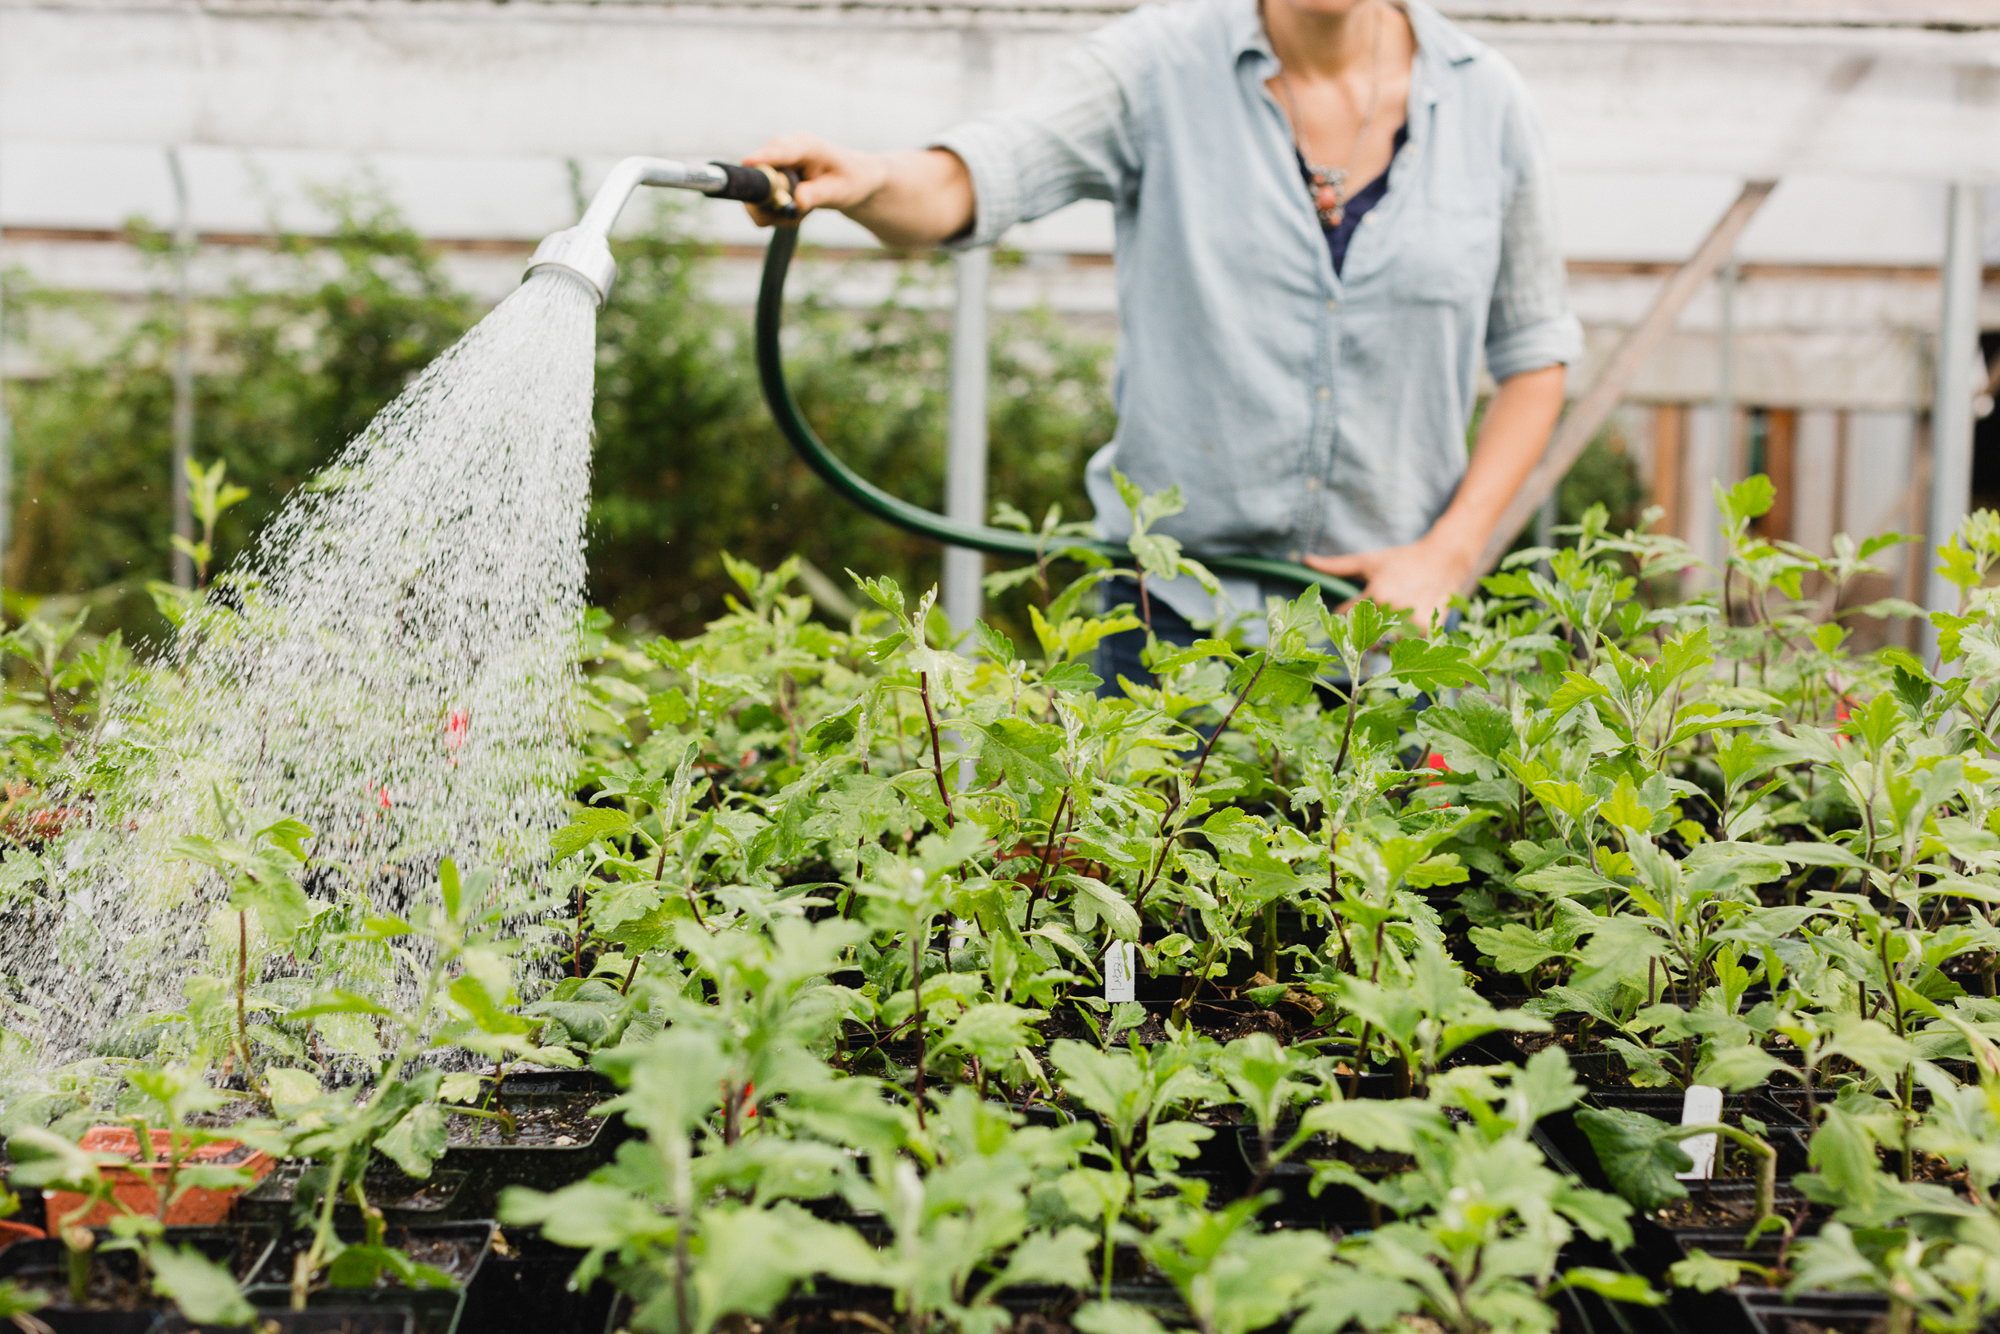 Erin Benzakein watering seedlings in a greenhouse